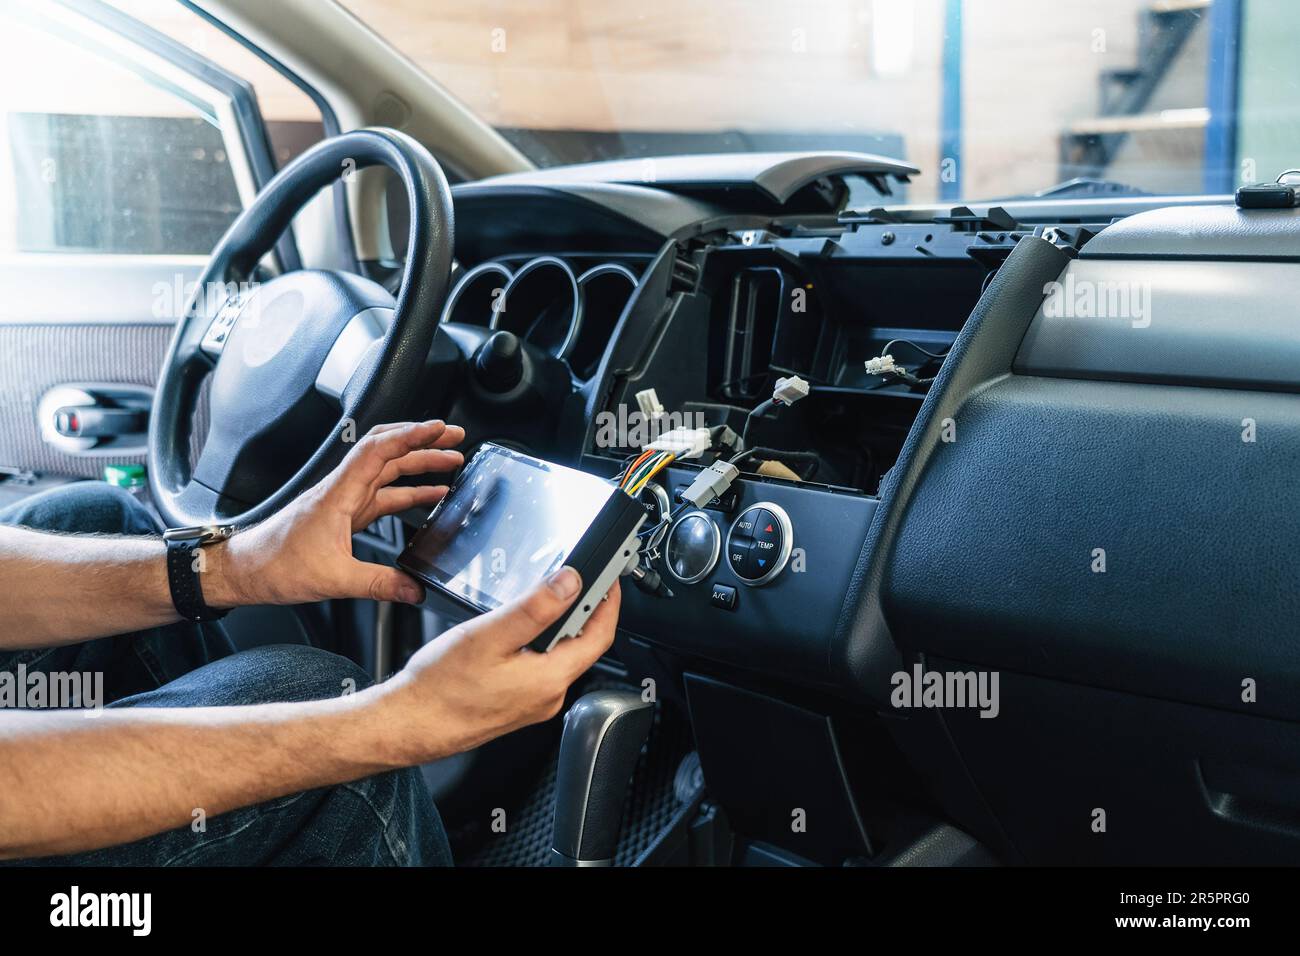 Auto in Car Service, process of installing modern 2-din radio sound system. Auto electric hands on dashboard fixing problem close-up. Stock Photo